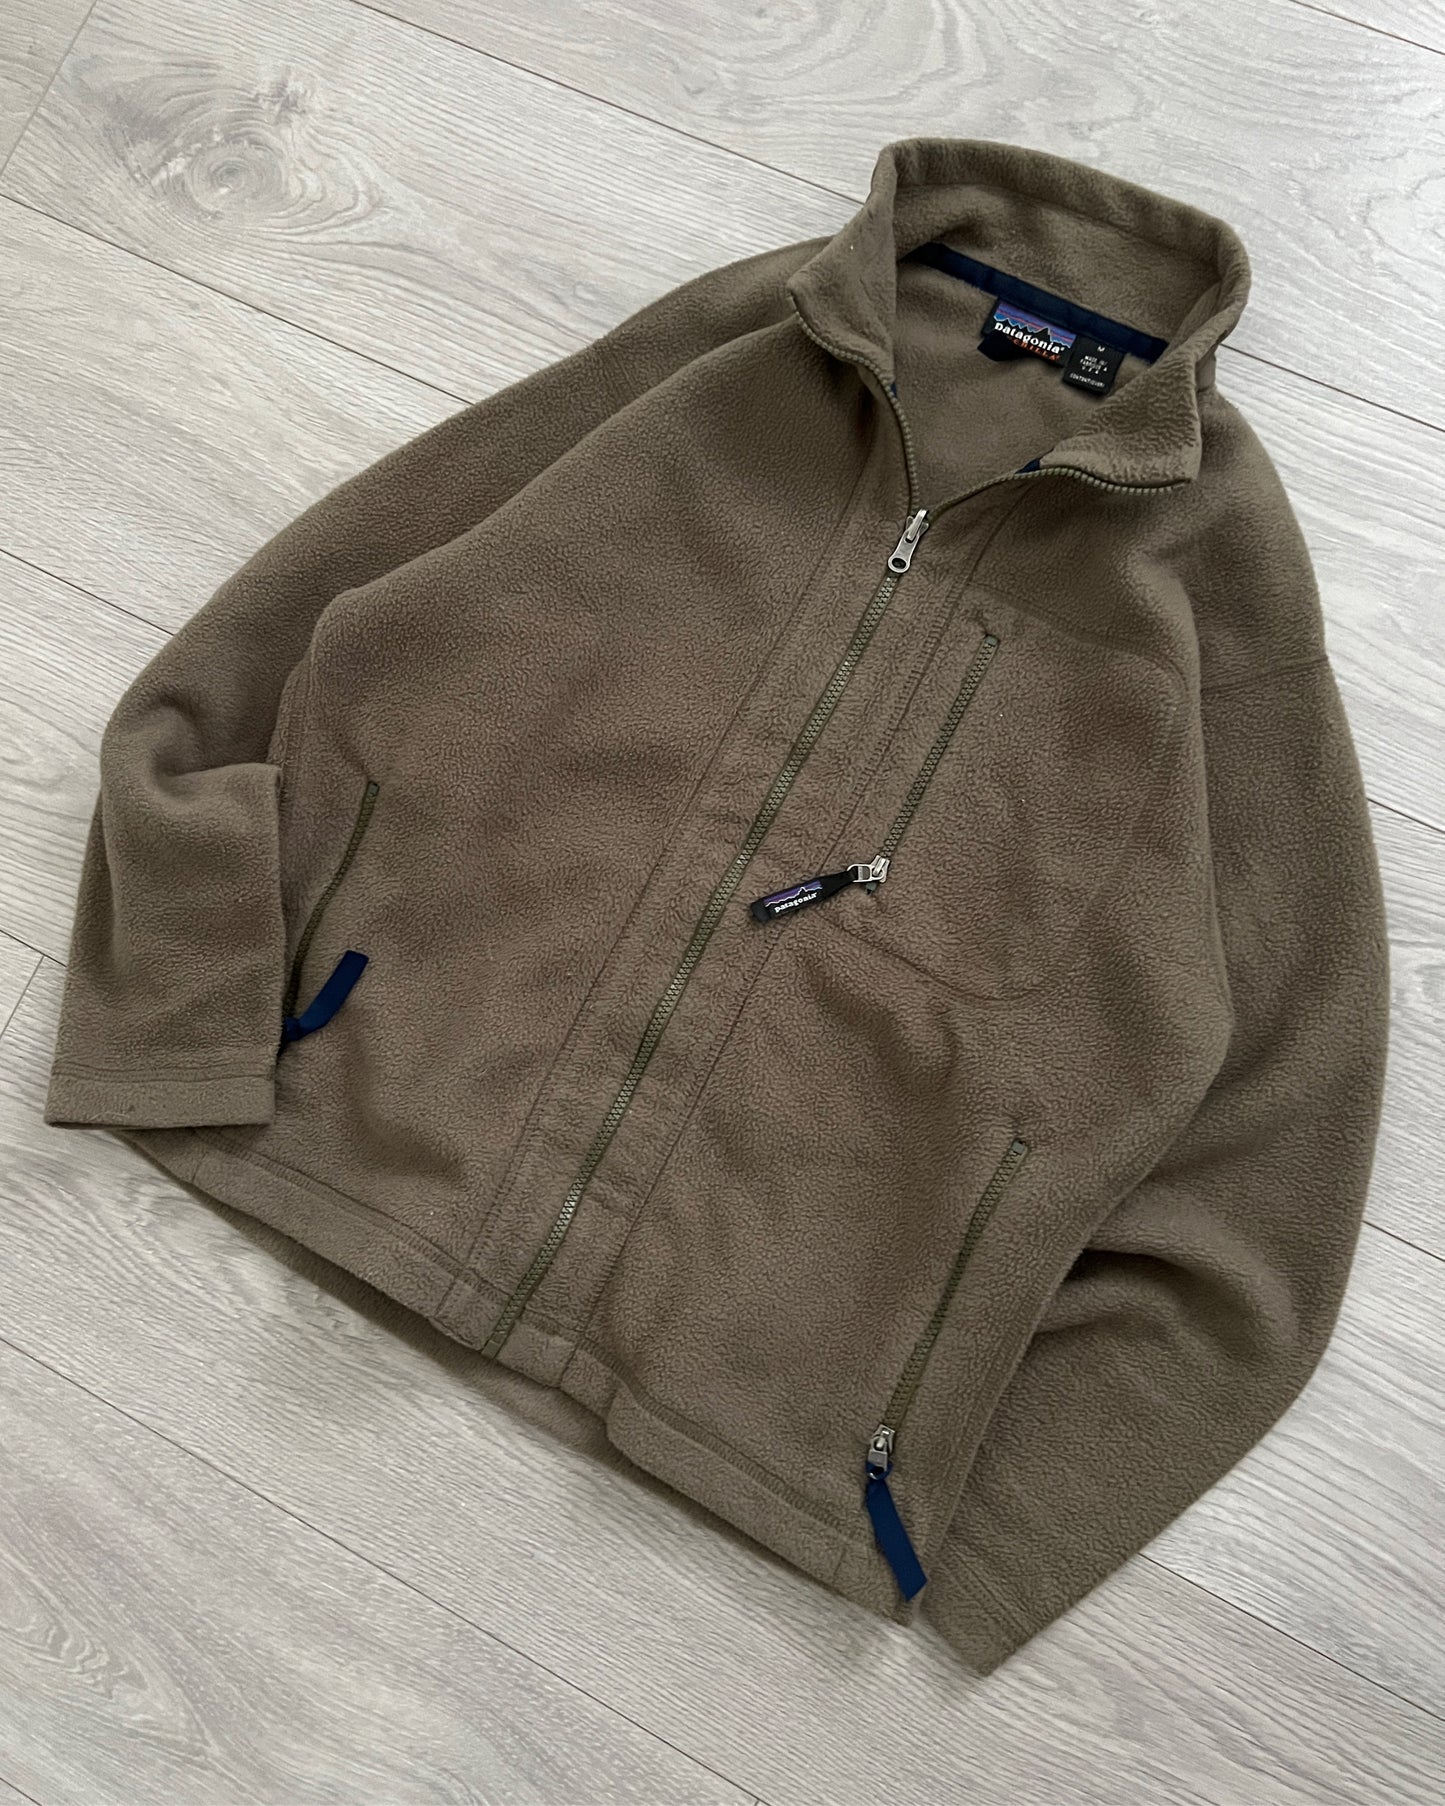 Patagonia FW2000 Synchilla Fleece Jacket Made in U.S.A. - Size M